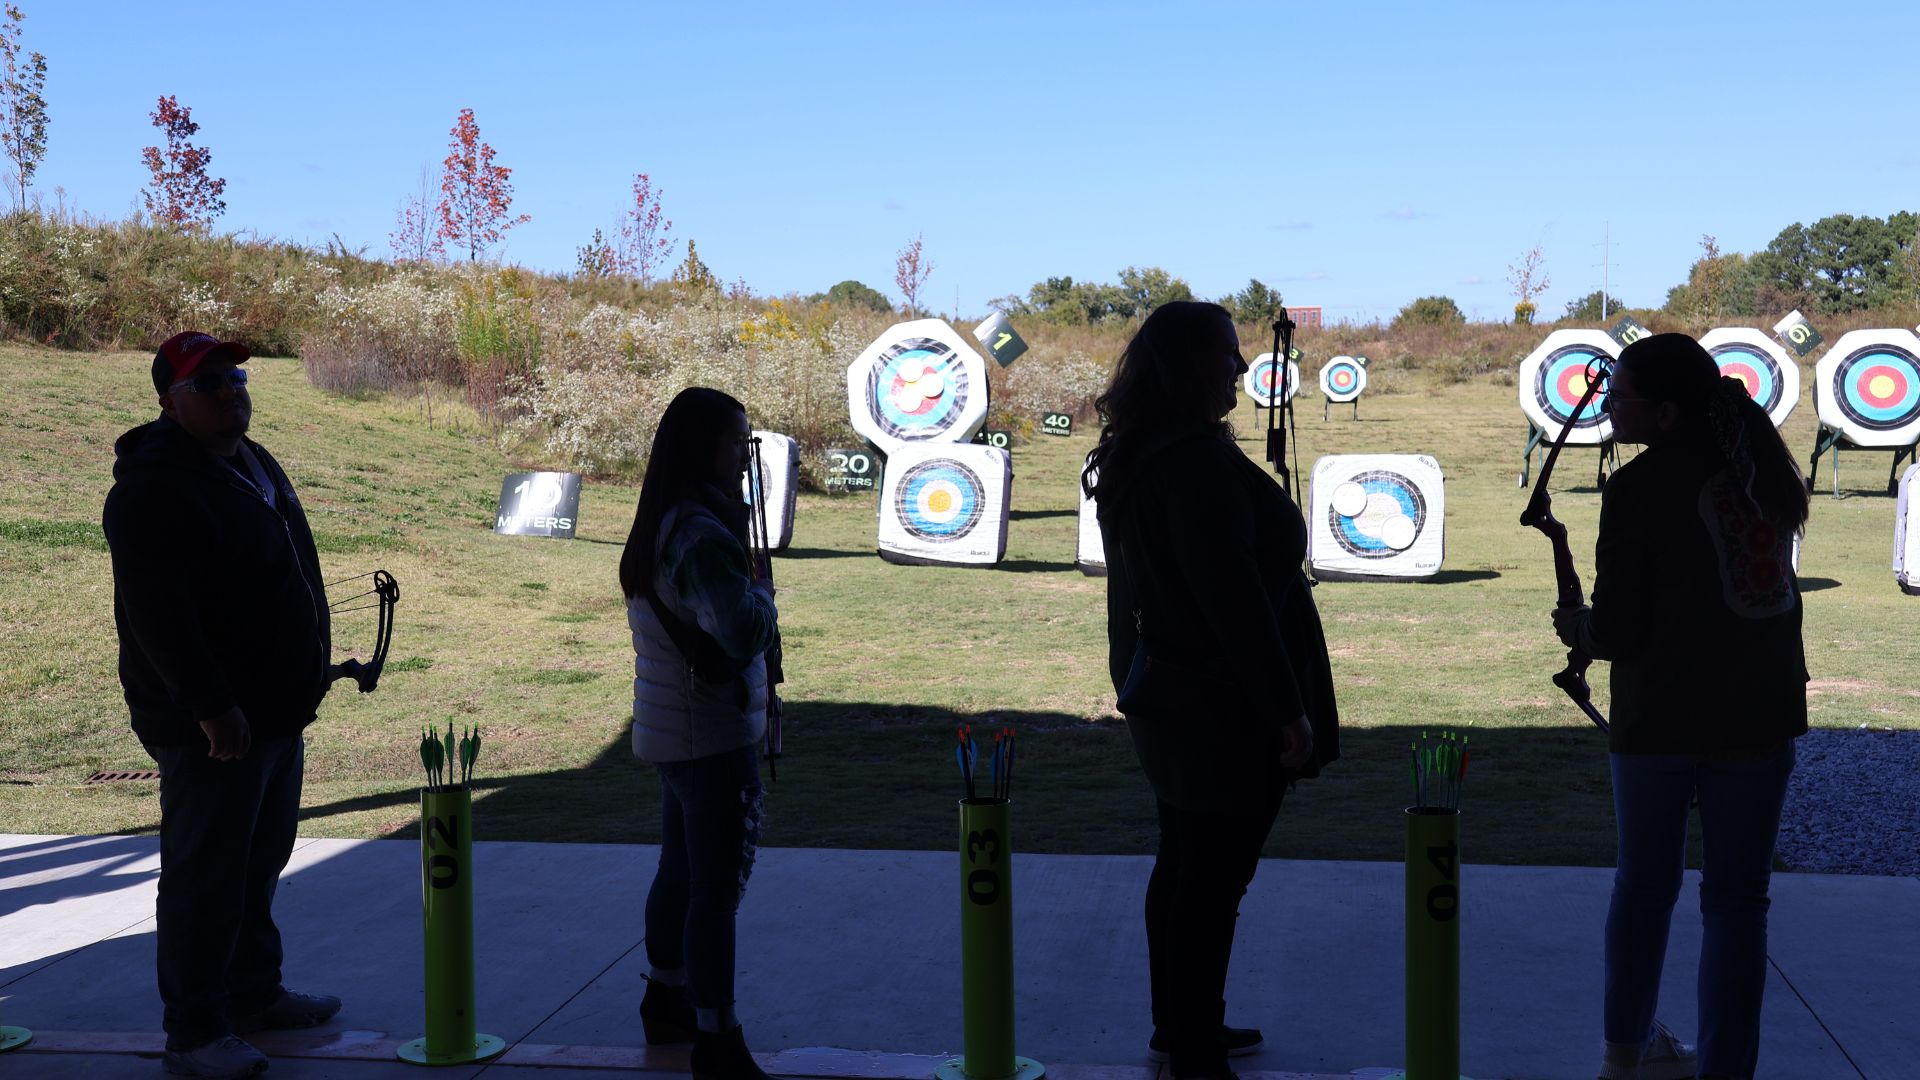 4 silouettes of archers standing in front of outdoor archery range with blue skies at Osage park